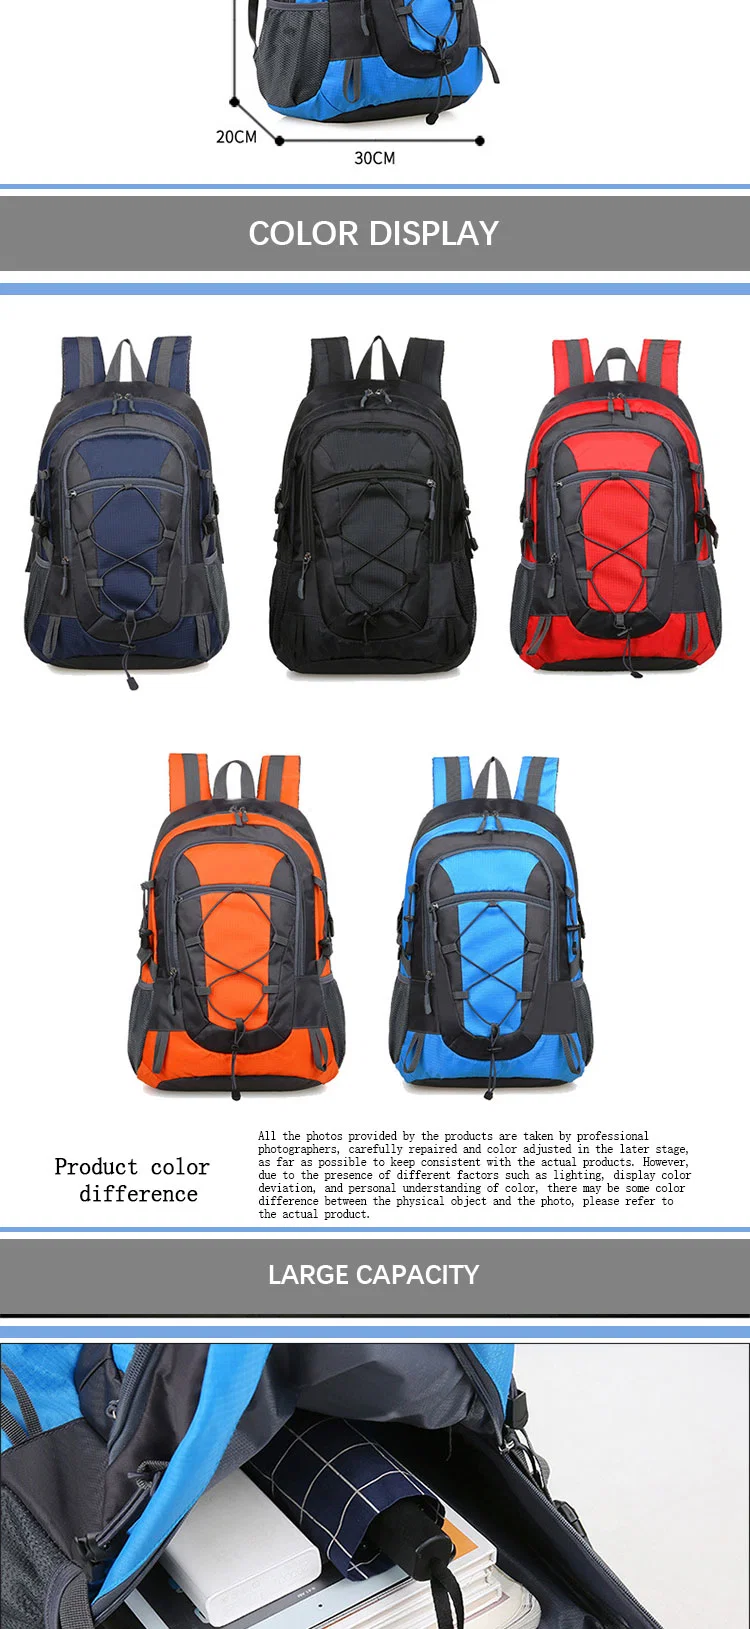 Unisex Outdoor Backpack Laptop Compartment Traveling Camping Hiking Climbing Sports Daypack